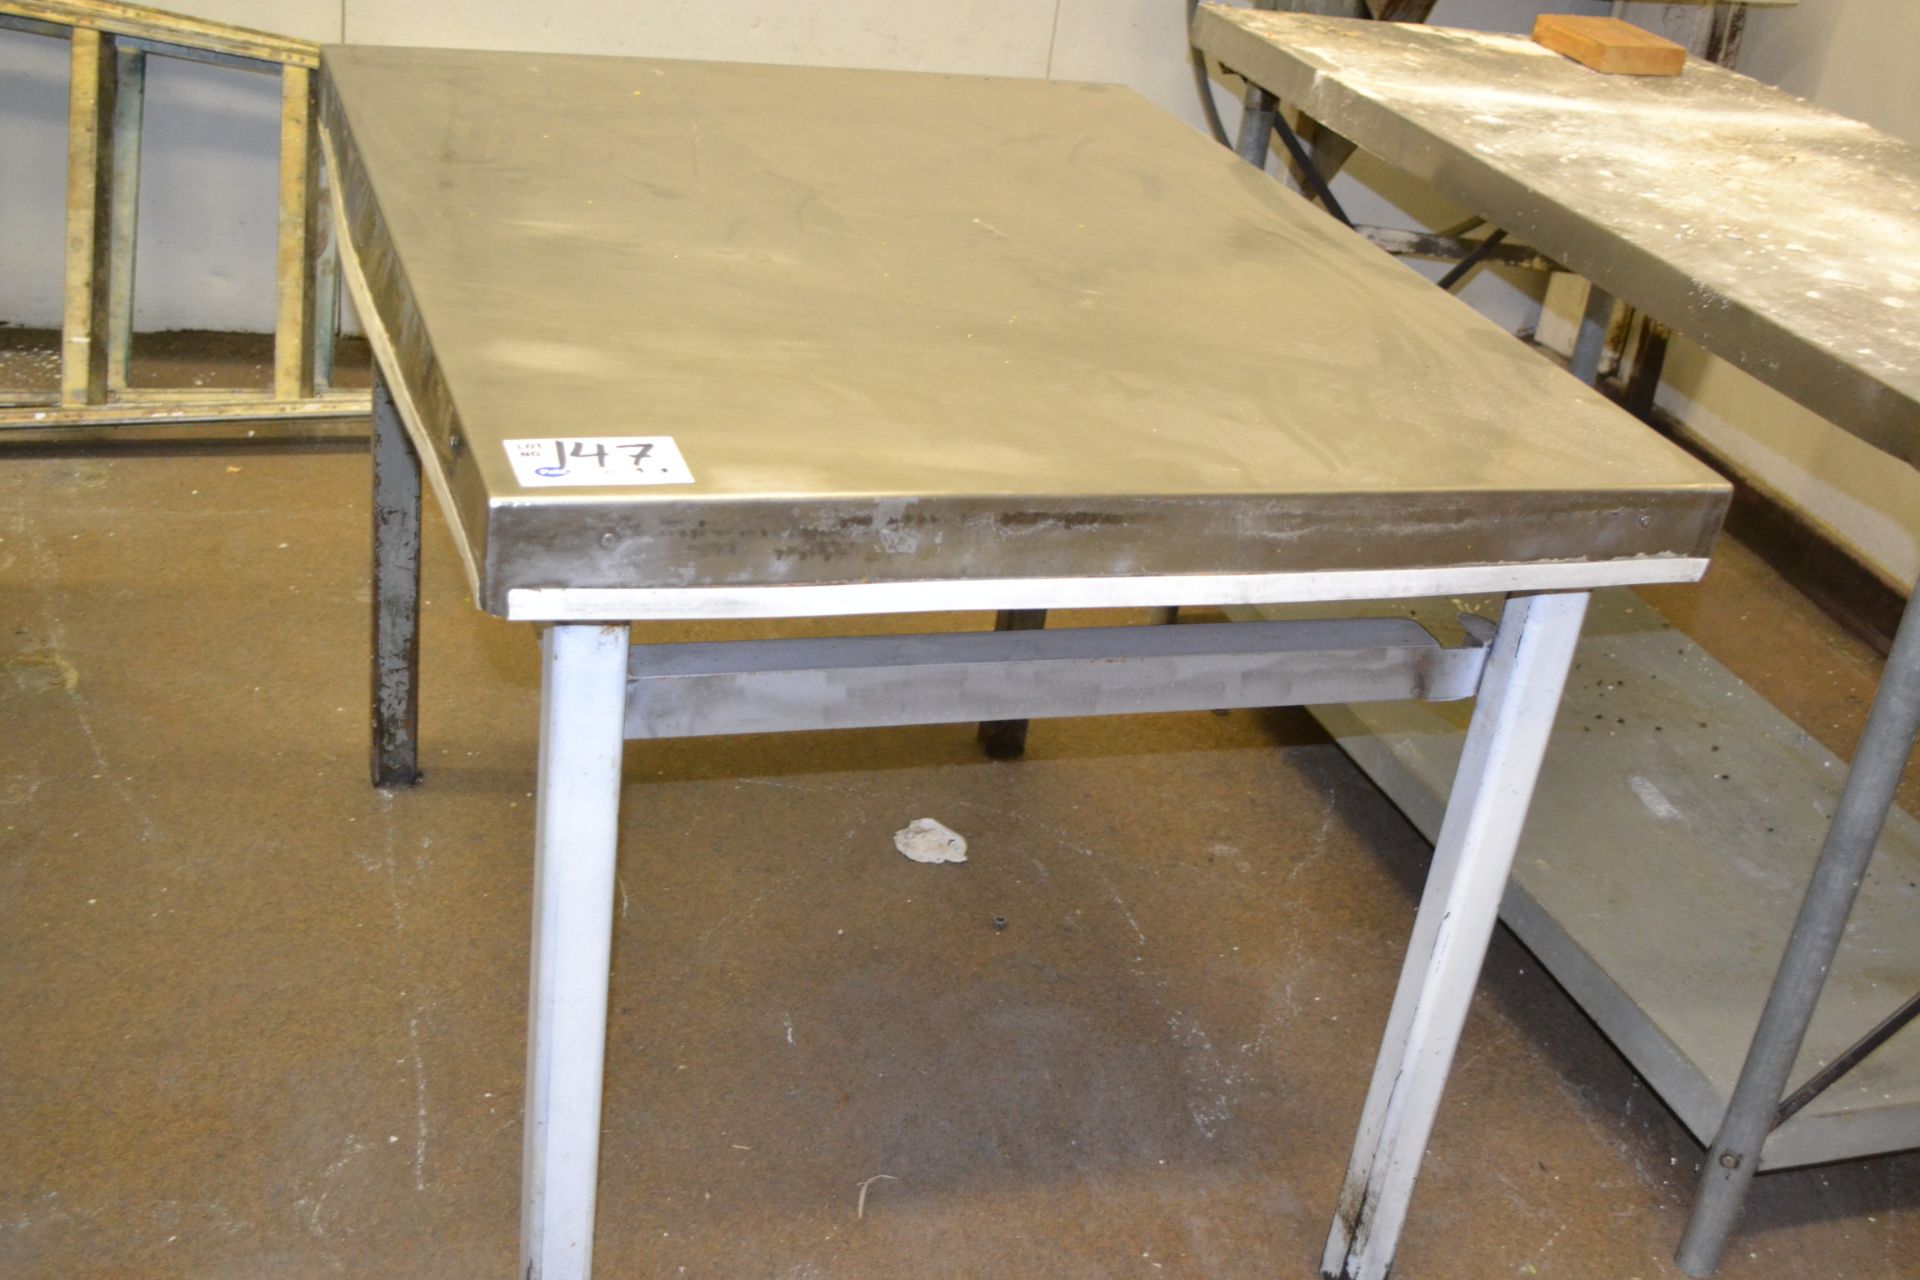 46" X 36" X 33.5 Tall Stainless Steel Table